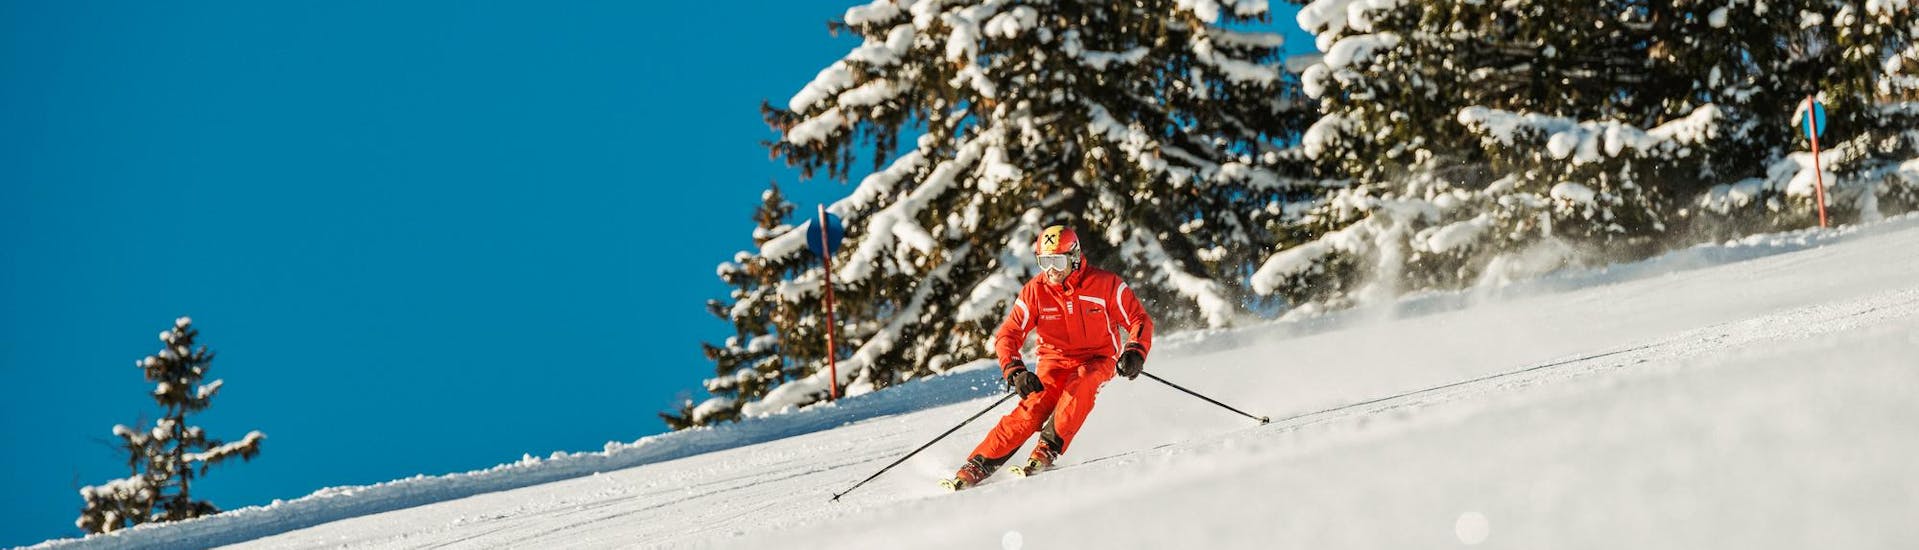 A skier descends the beautiful slopes in the Achenkirch ski area during the ski lessons for and adults for beginners with the Busslehner Achenkirch ski school.